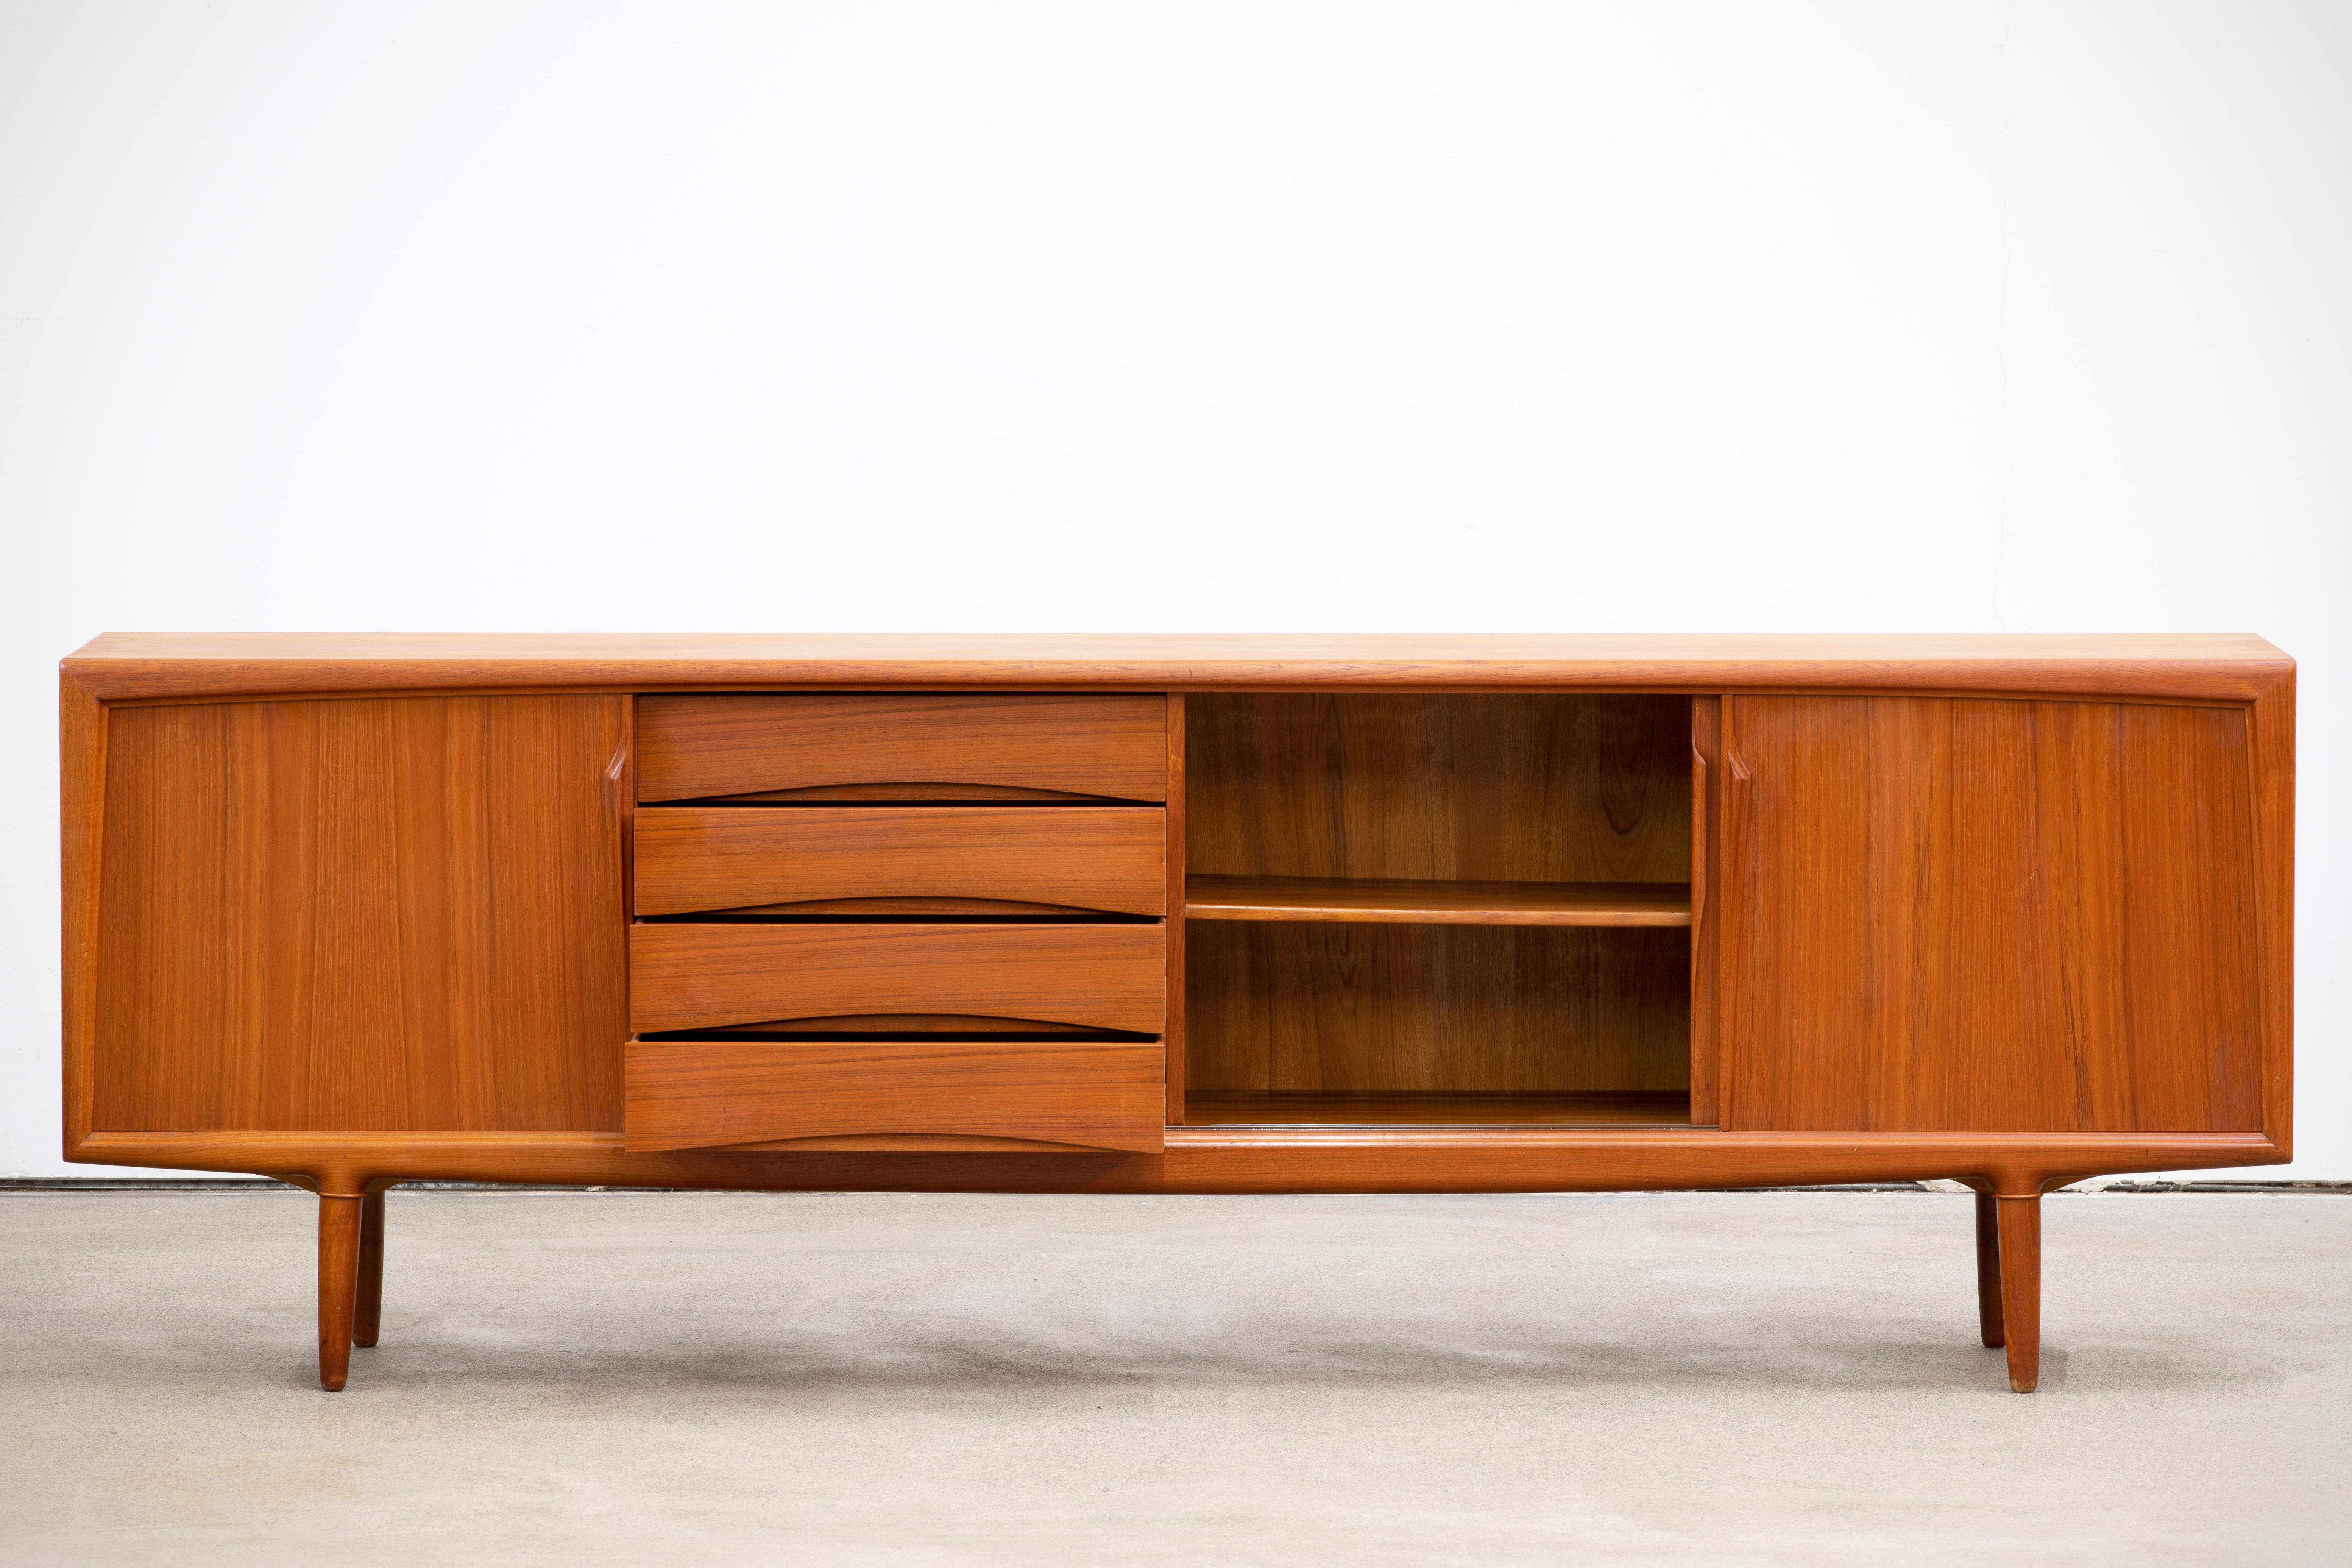 This sideboard by Gunni Omann is a true classic of Danish furniture design. The representative model number 13 is made of very high quality teak and is in an exceptionally good condition. The highlight of the furniture is the design of the front